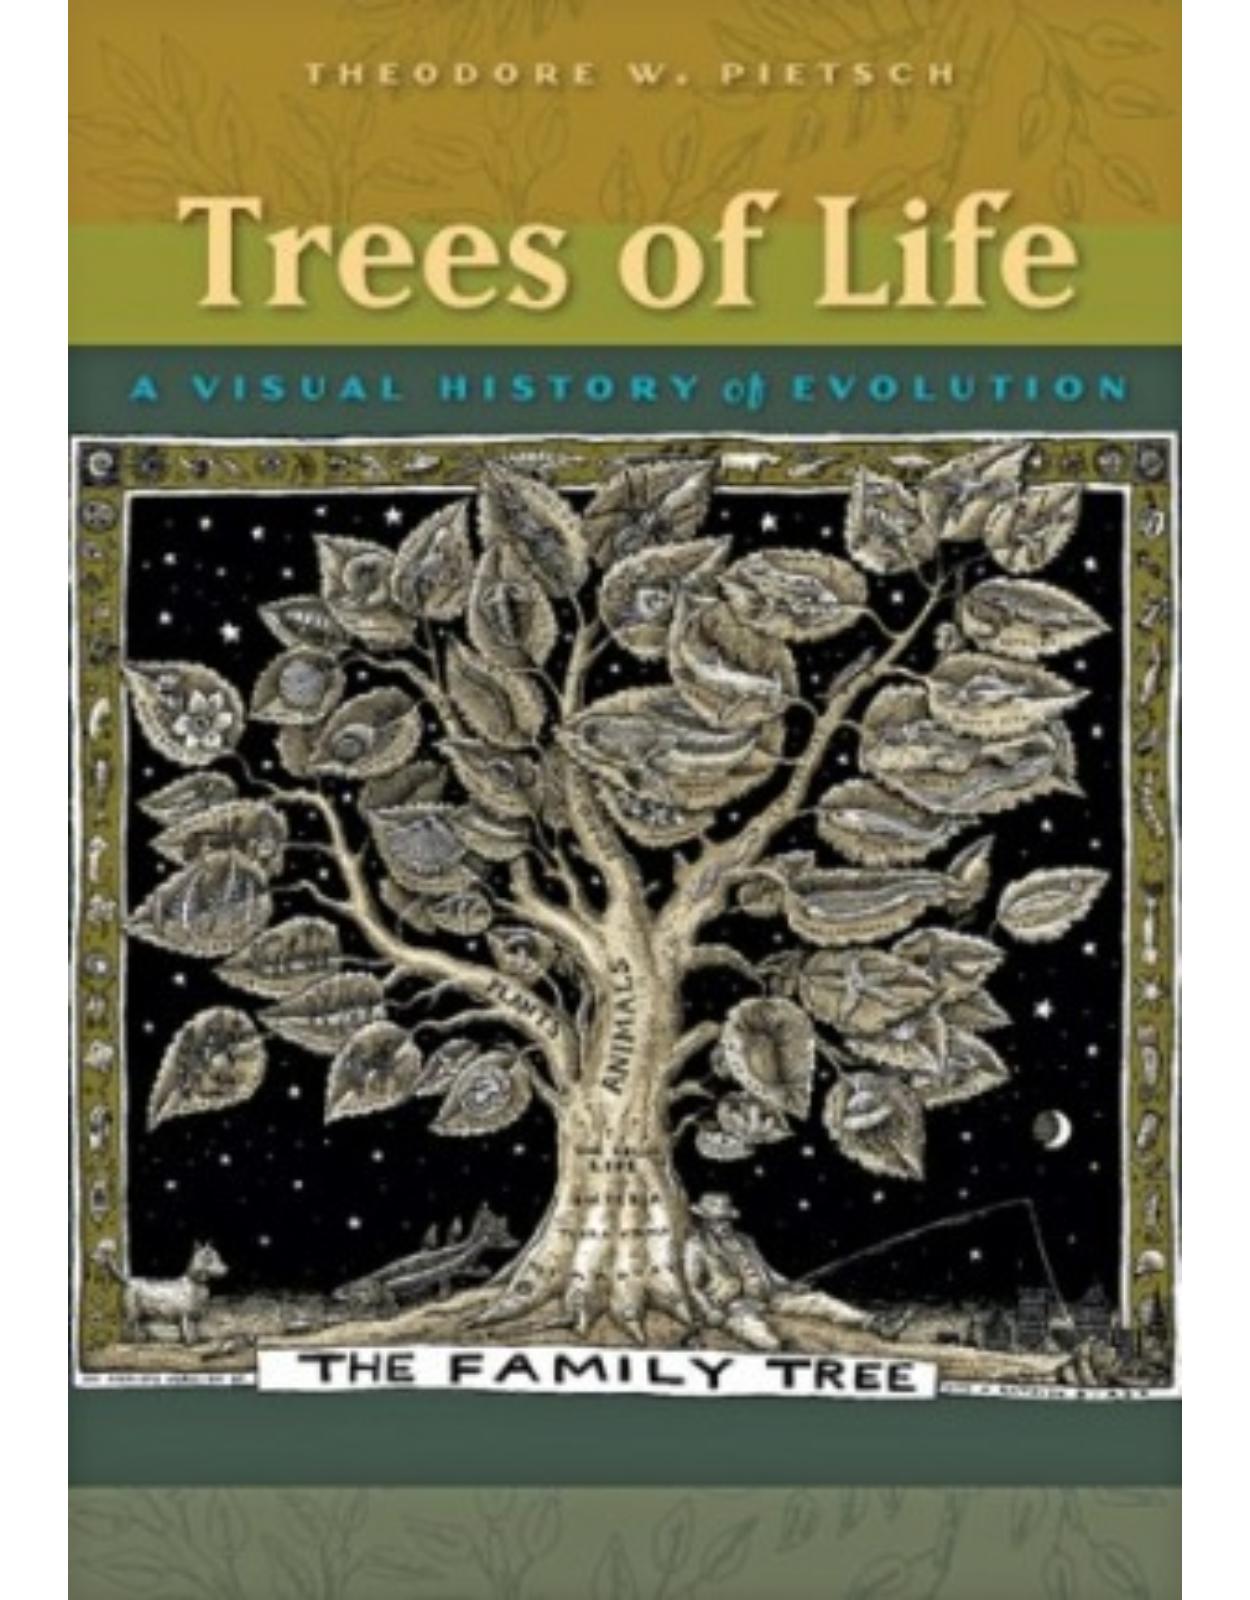 Trees of Life. A Visual History of Evolution